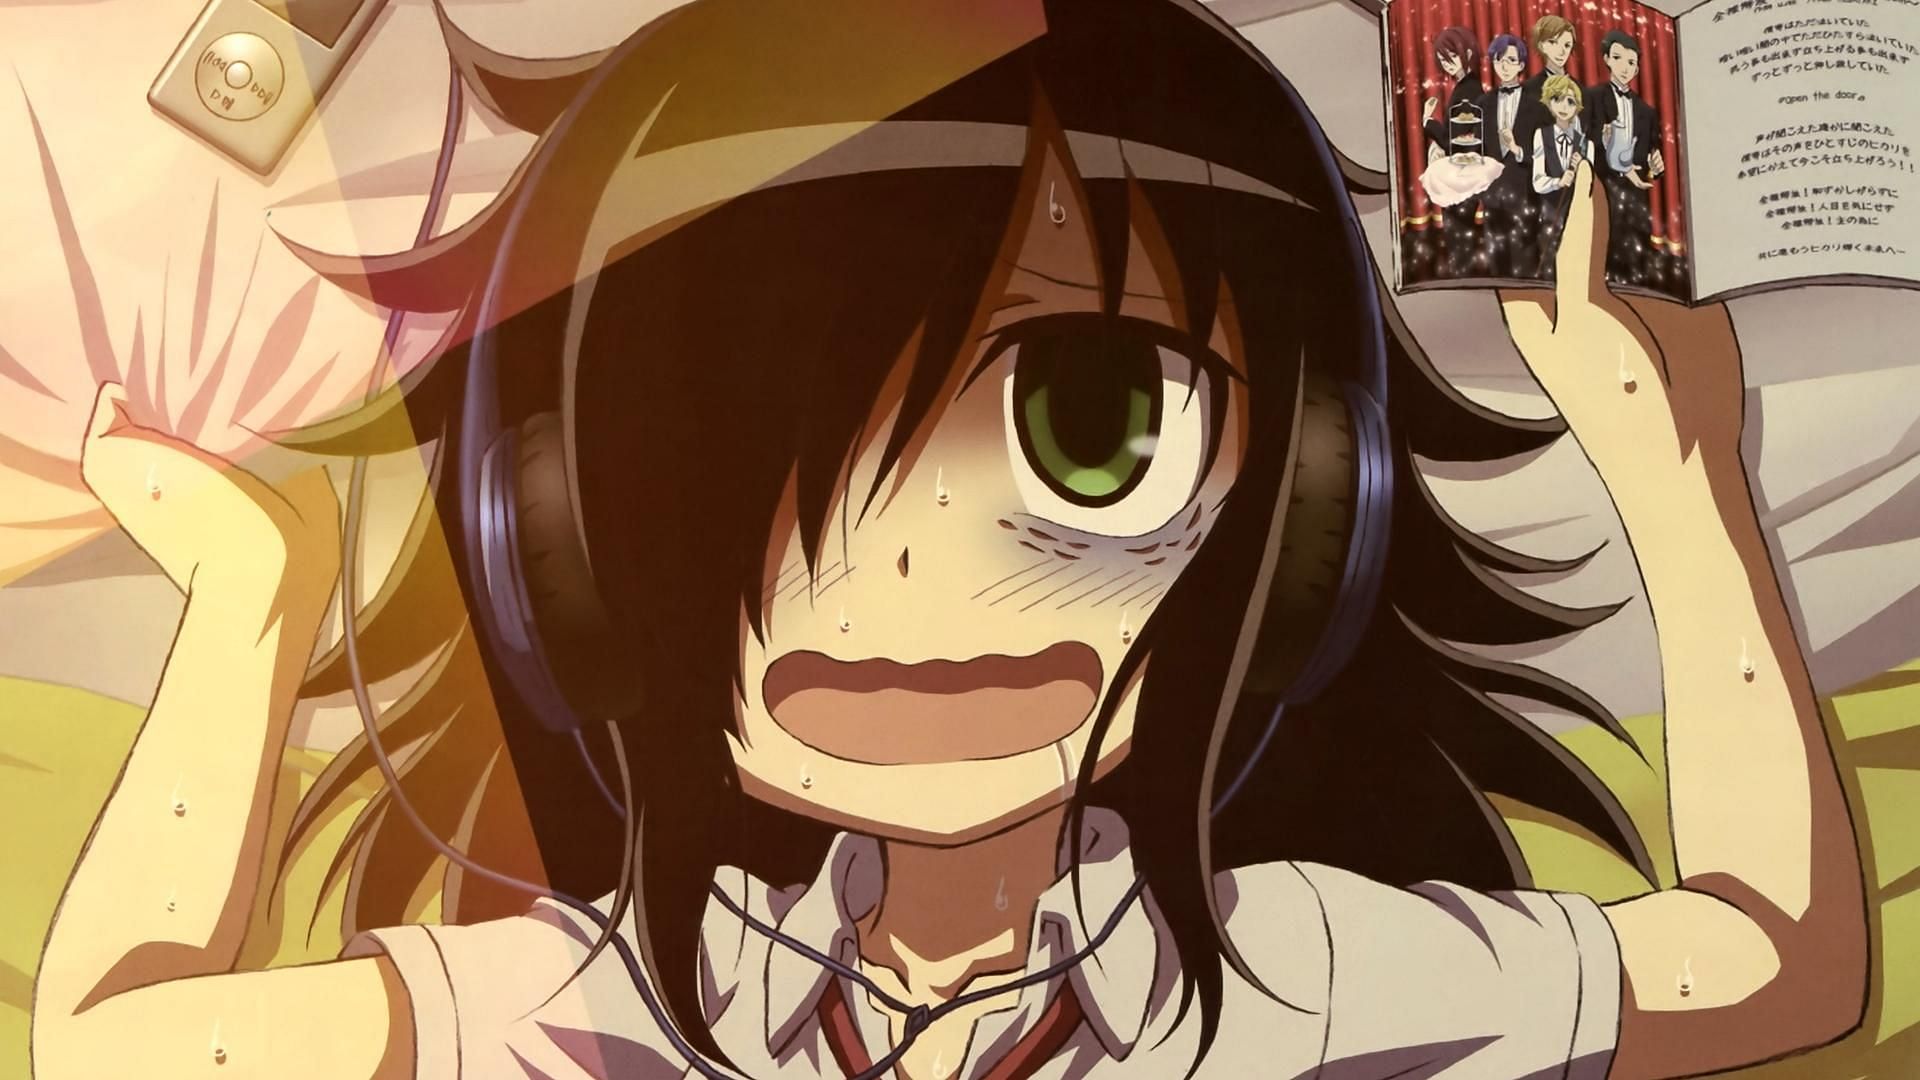 A still from Watamote featuring the main character (Image via SILVER LINK.)